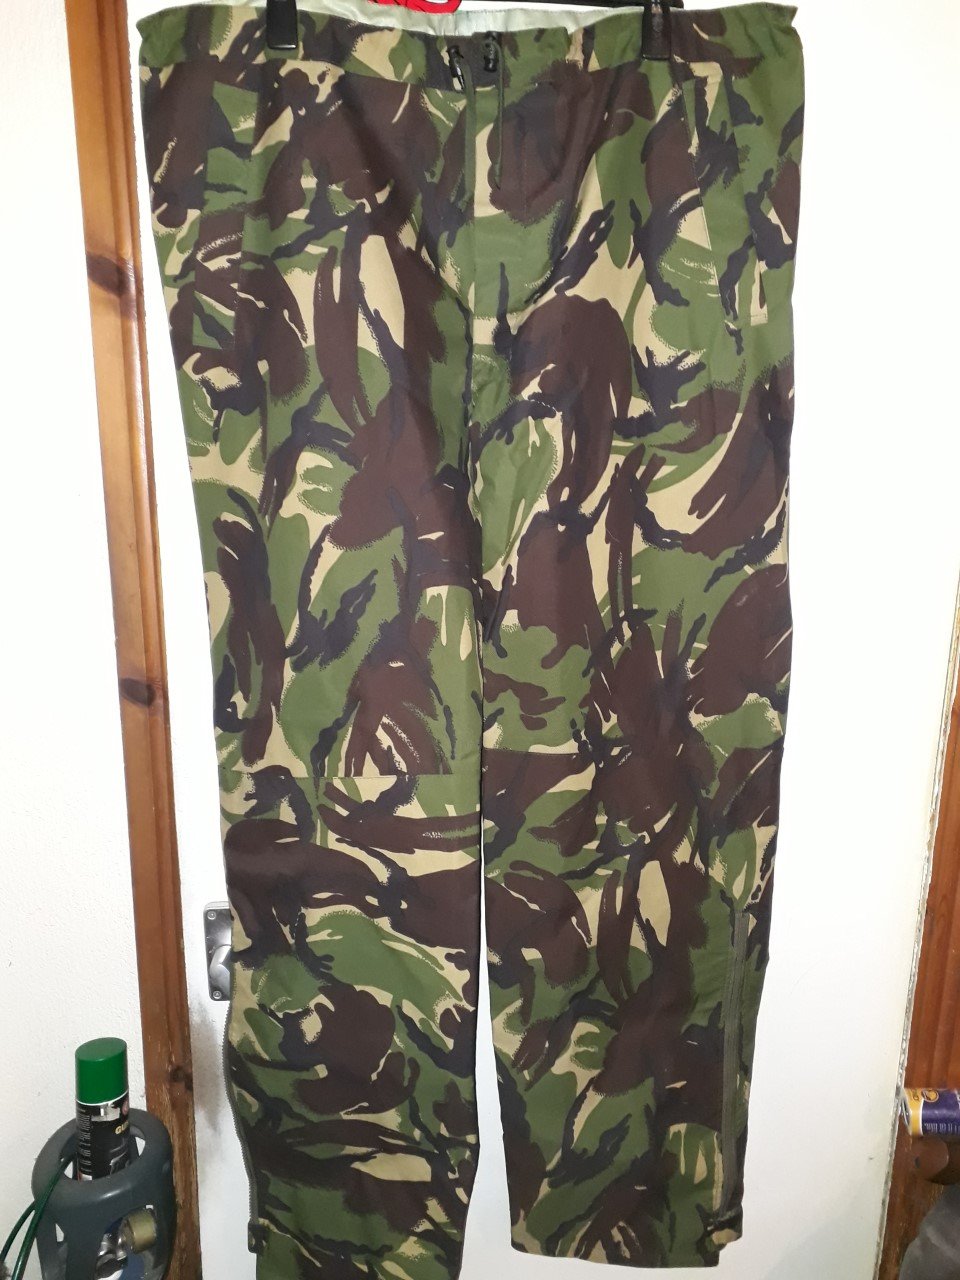 GORE-TEX DPM trousers